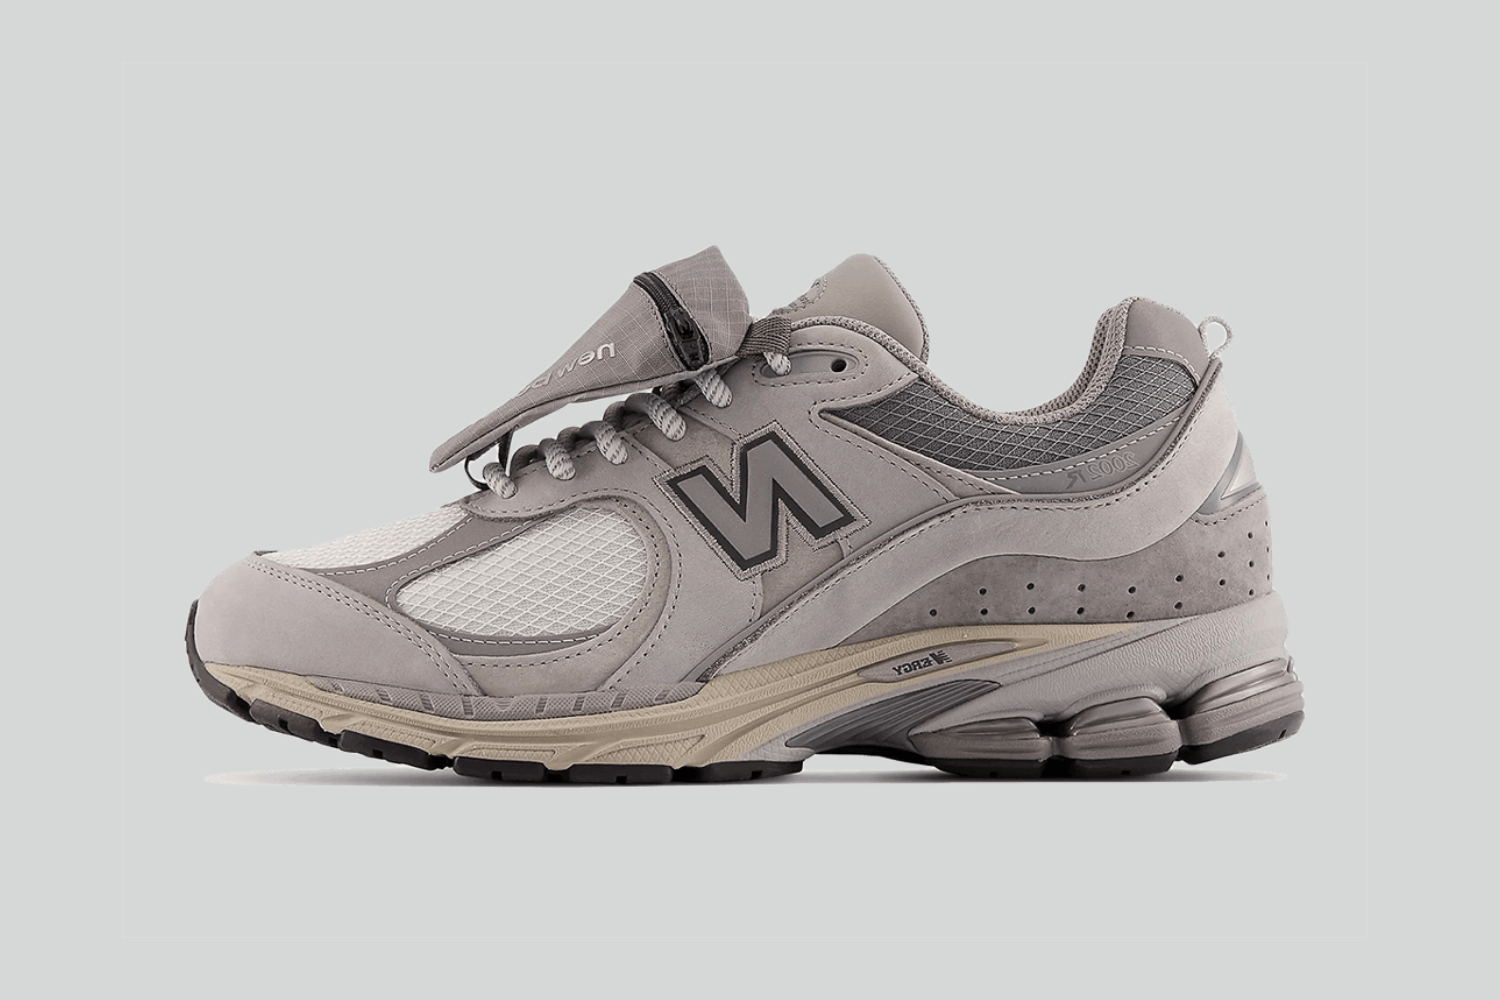 The New Balance 2002R 'Grey' comes with a pocket